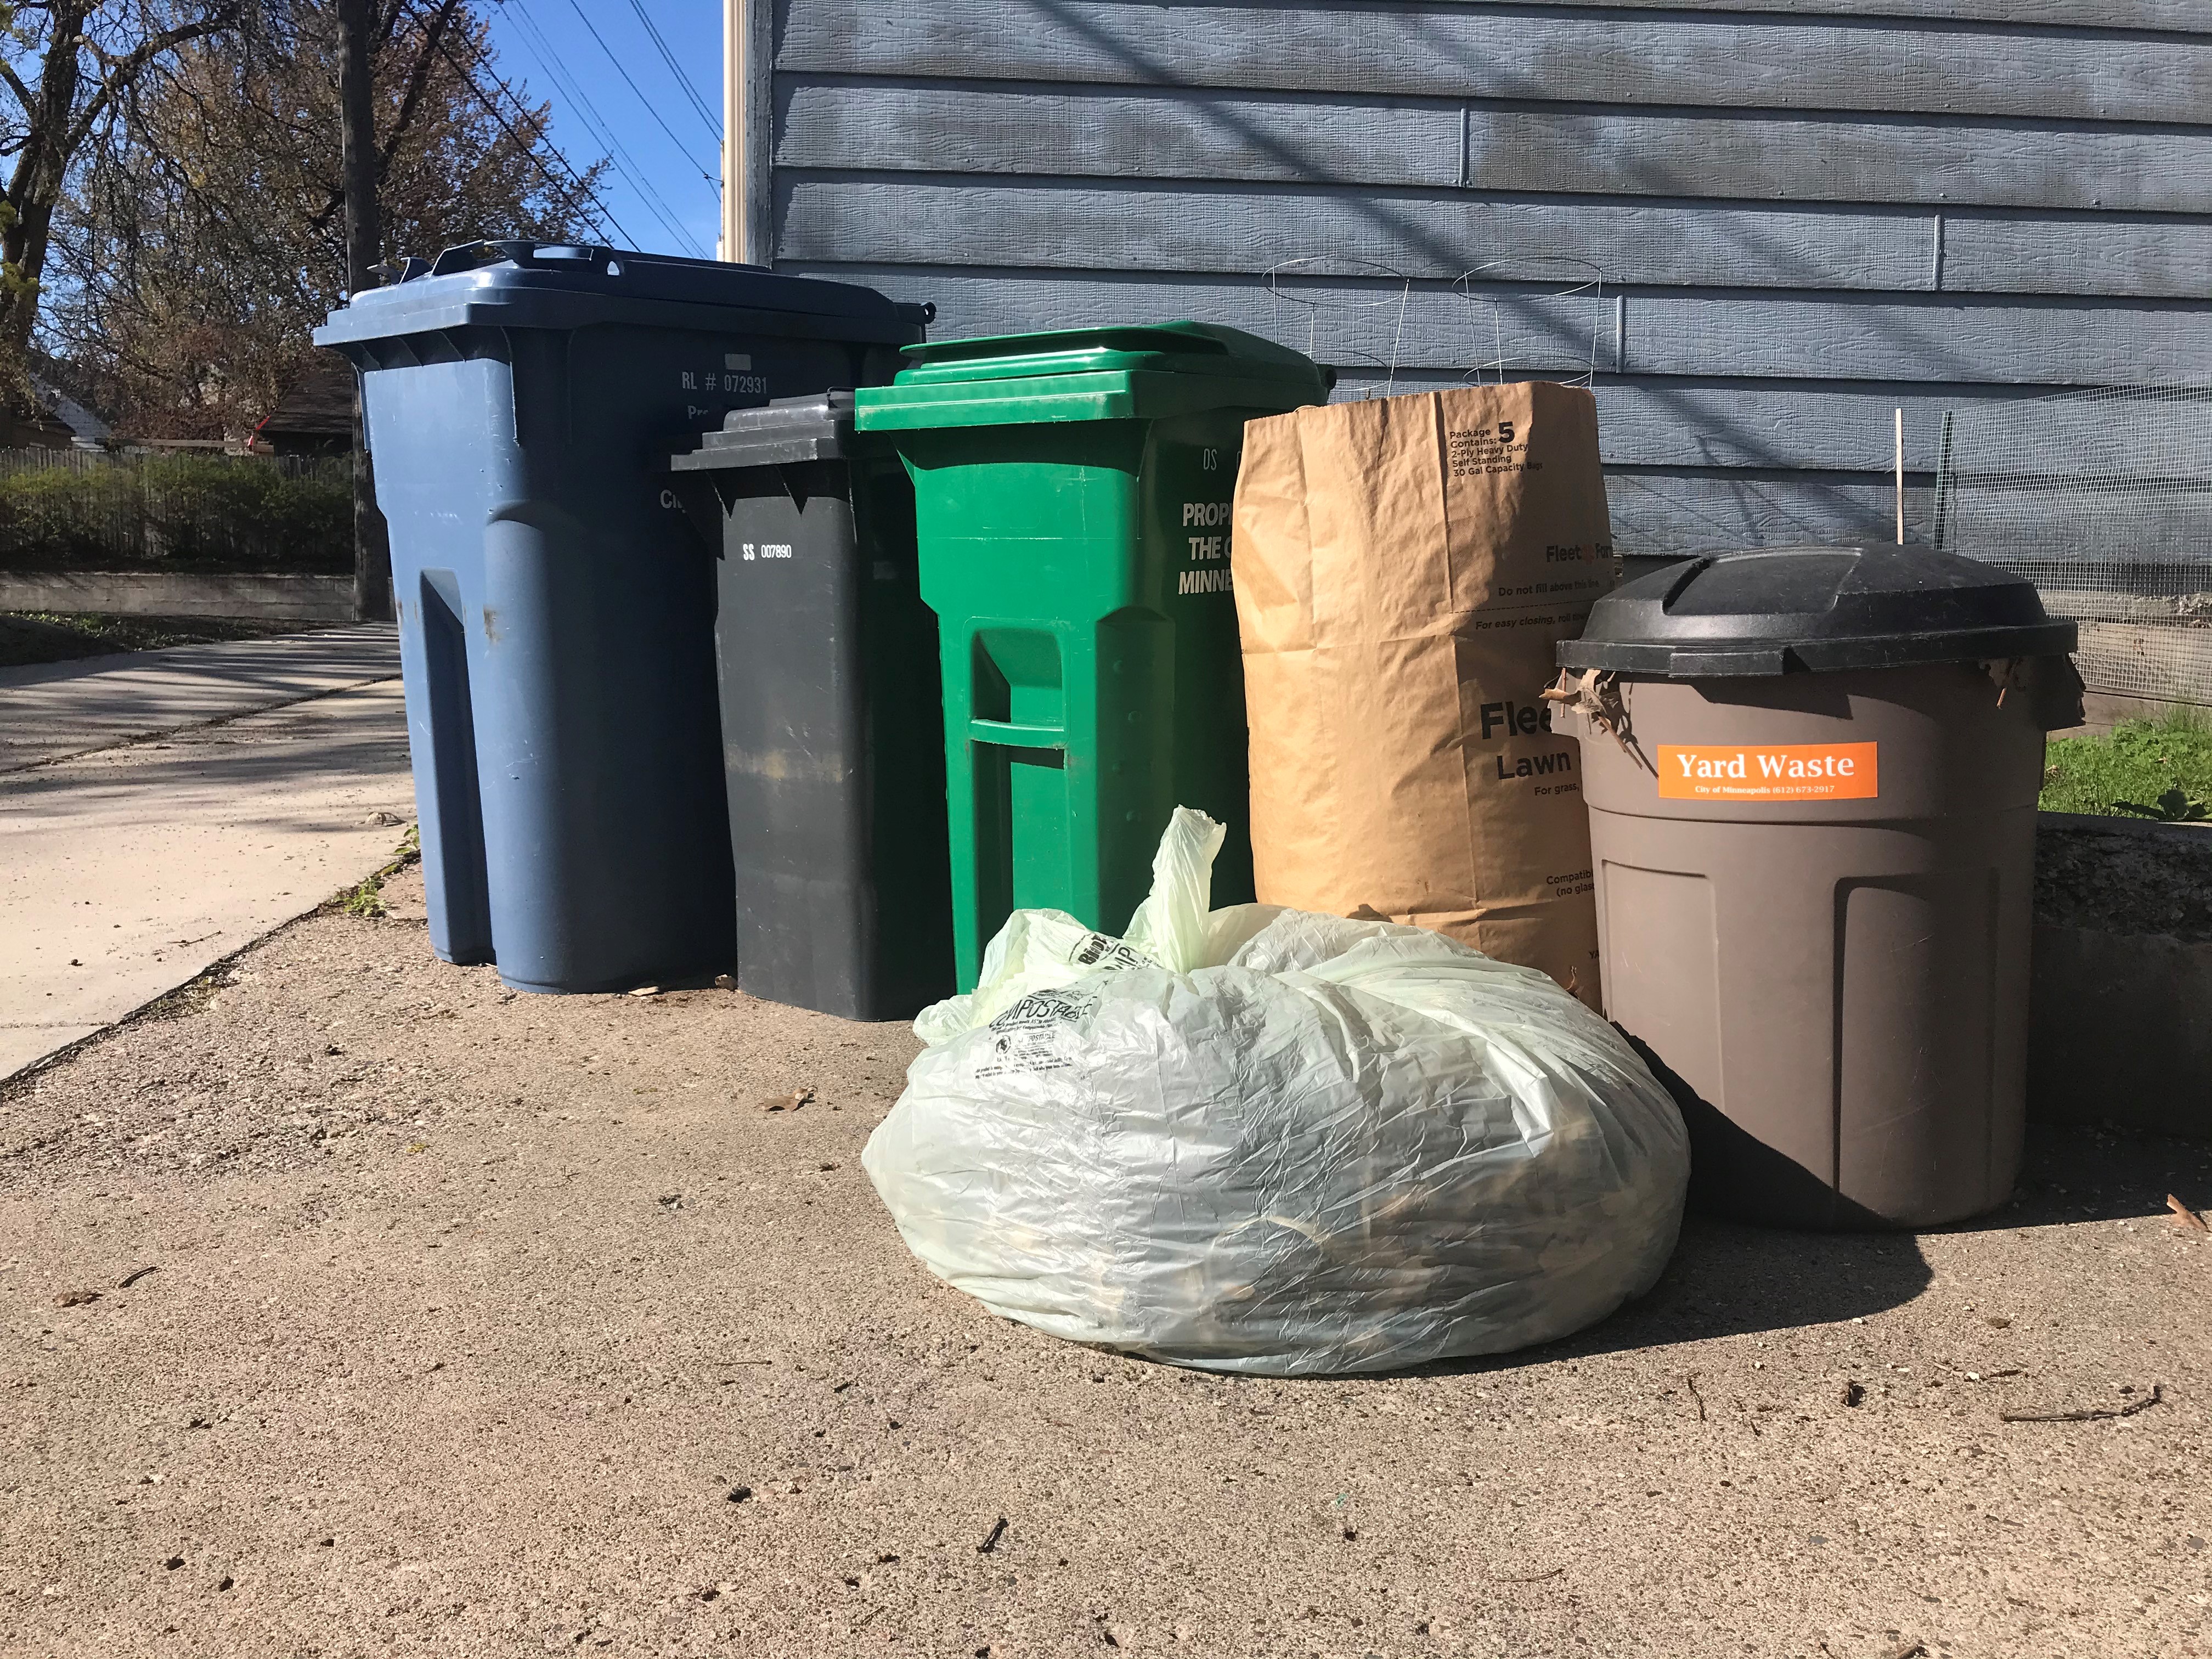 Yard waste prepared for collection